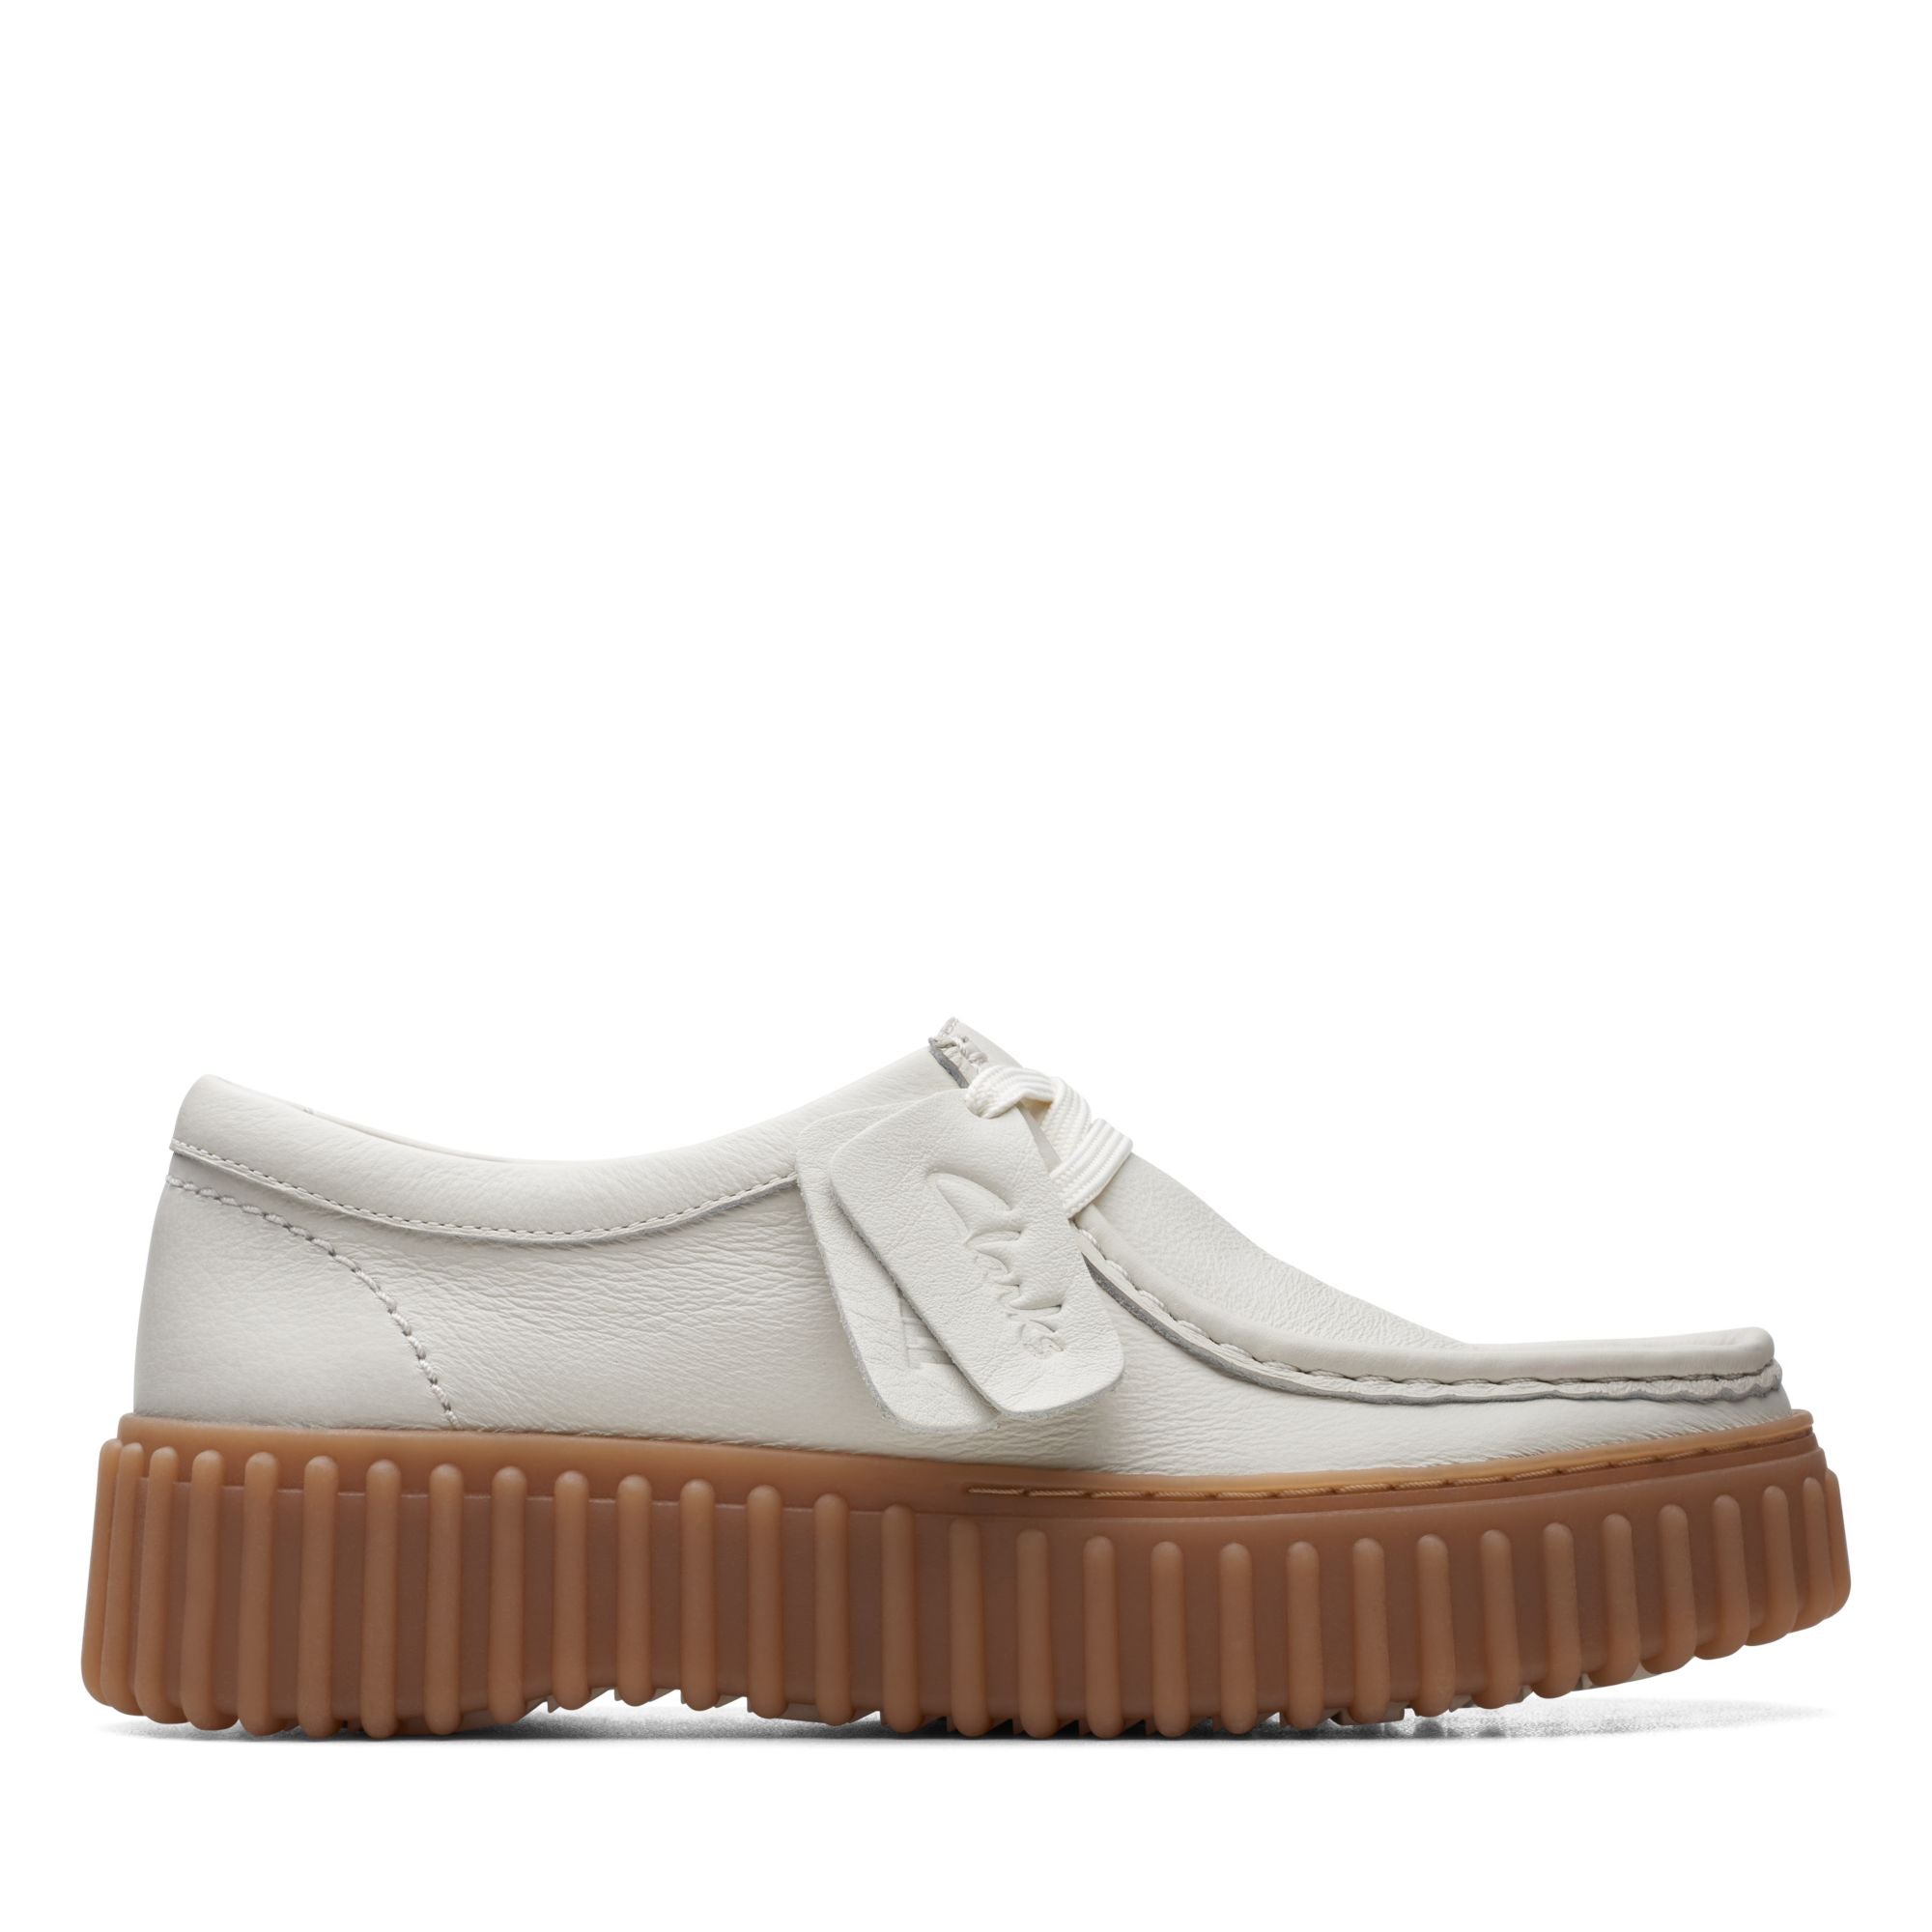 Torhill Bee Off White Leather - Clarks Canada Official Site | Clarks Shoes